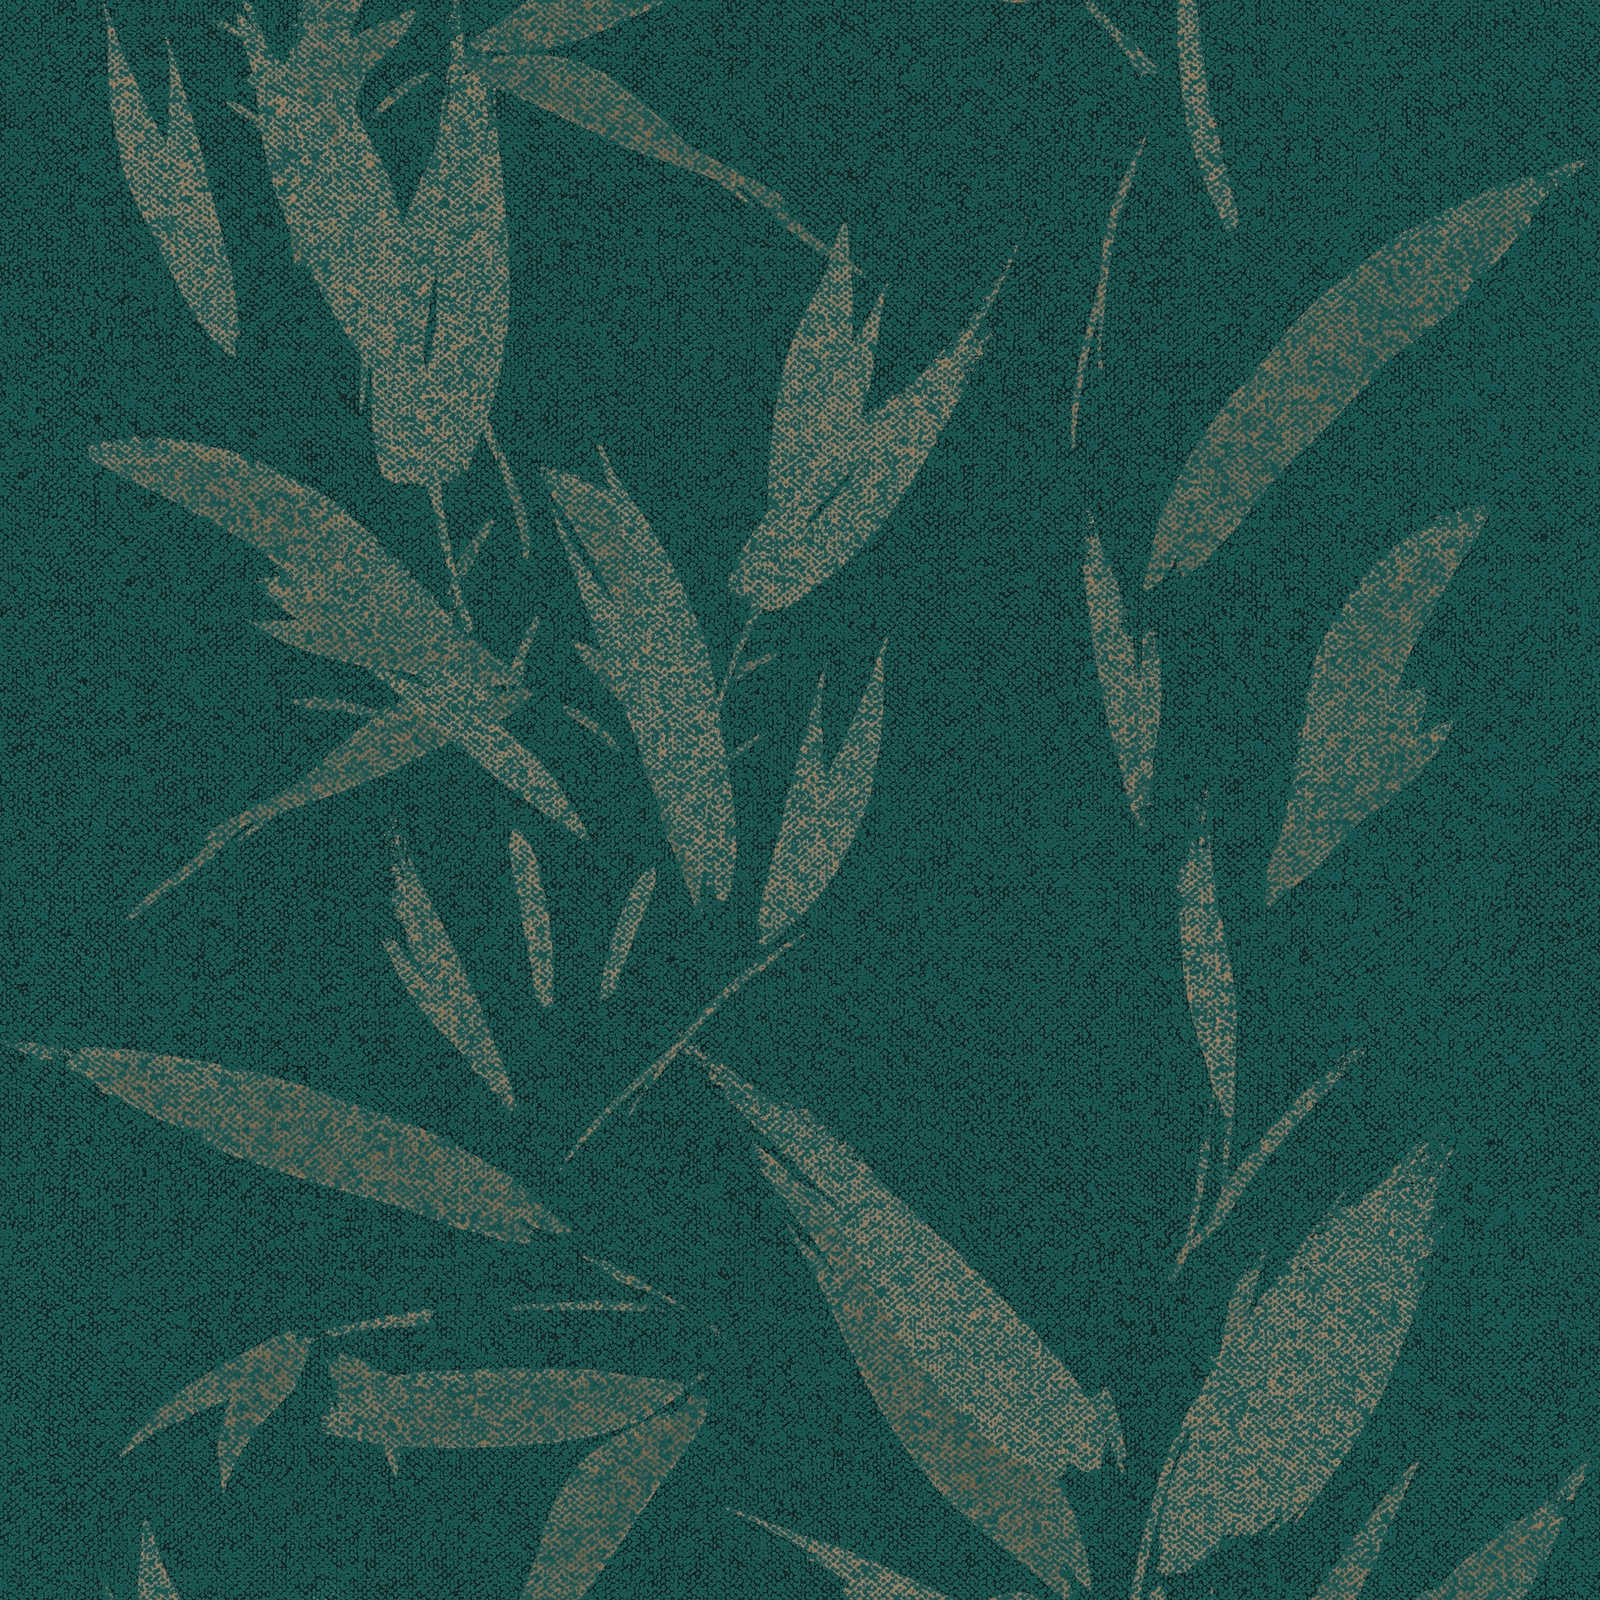 Leaves wallpaper abstract with textile look - green, beige
